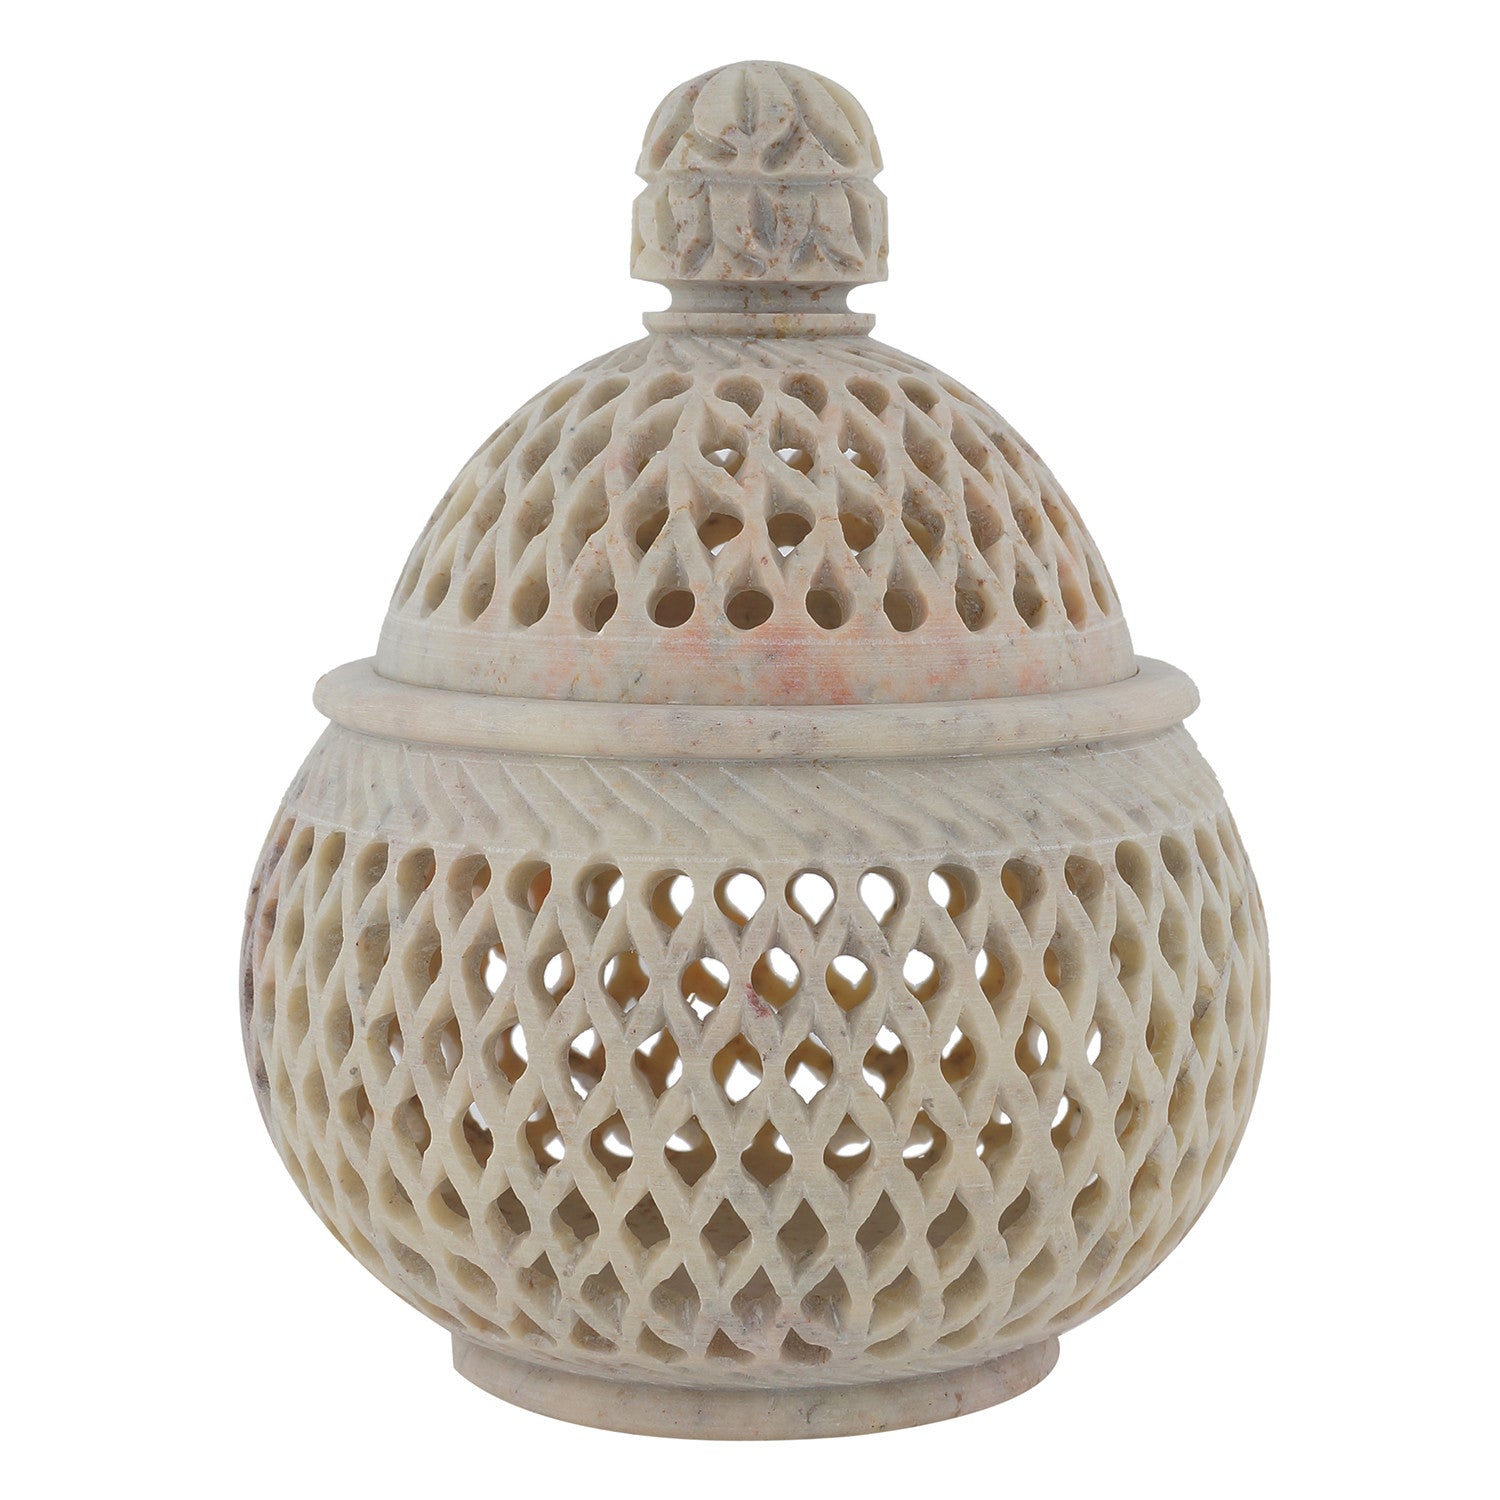 Candle Holder with lid - Stone carving - 4" diameter - Lattice Style (SA1001)